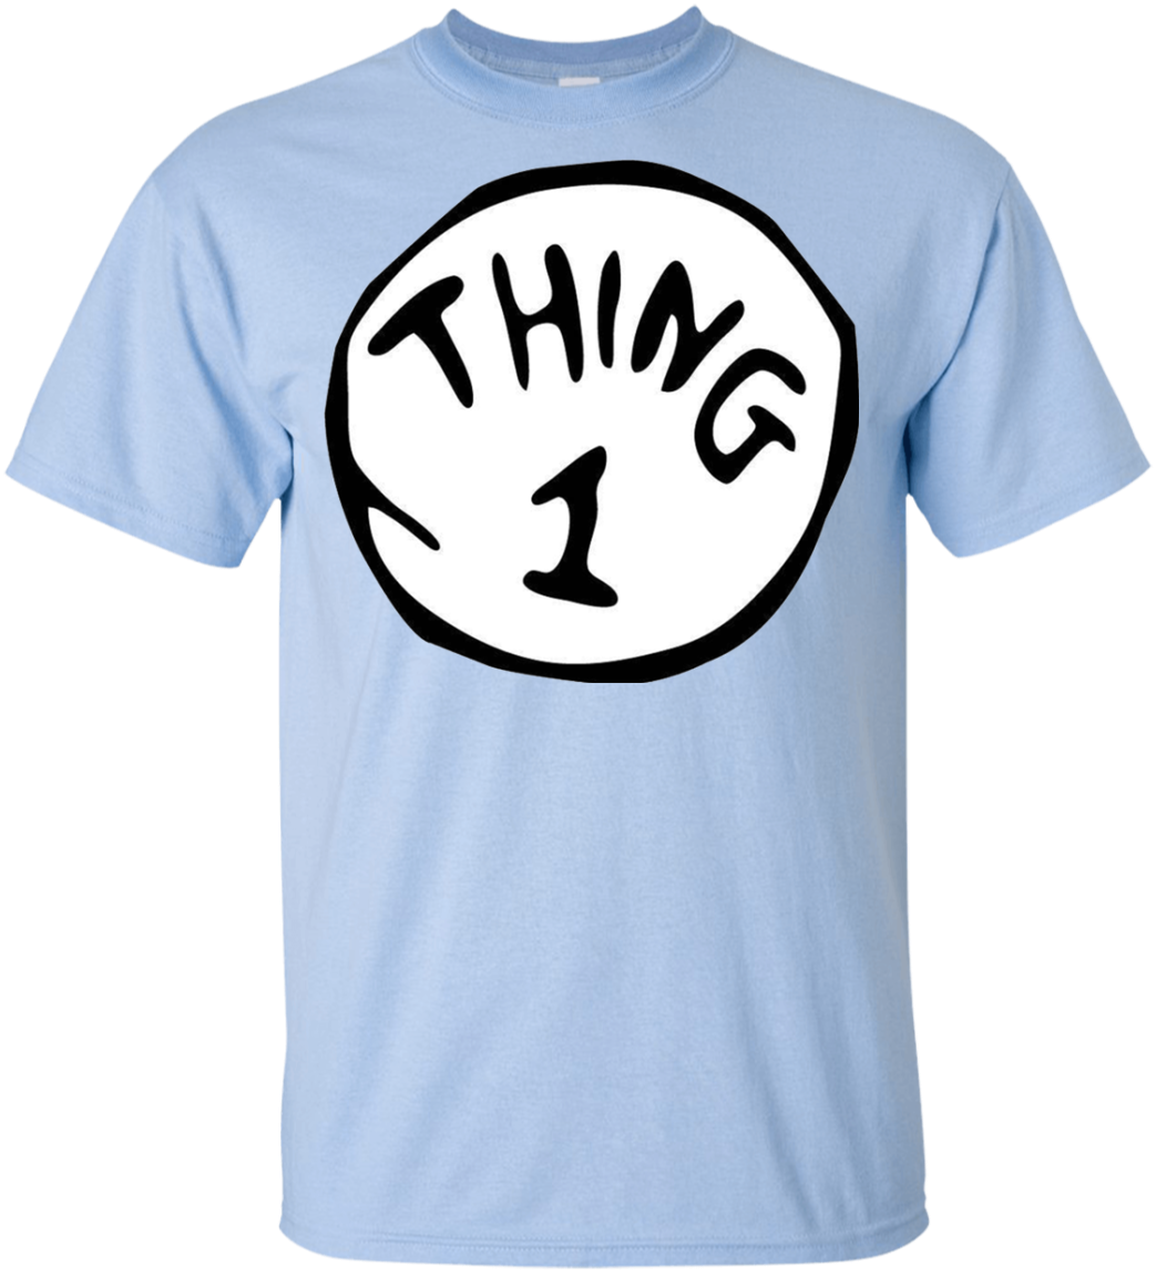 A Blue T-shirt With A White Circle With Black Text